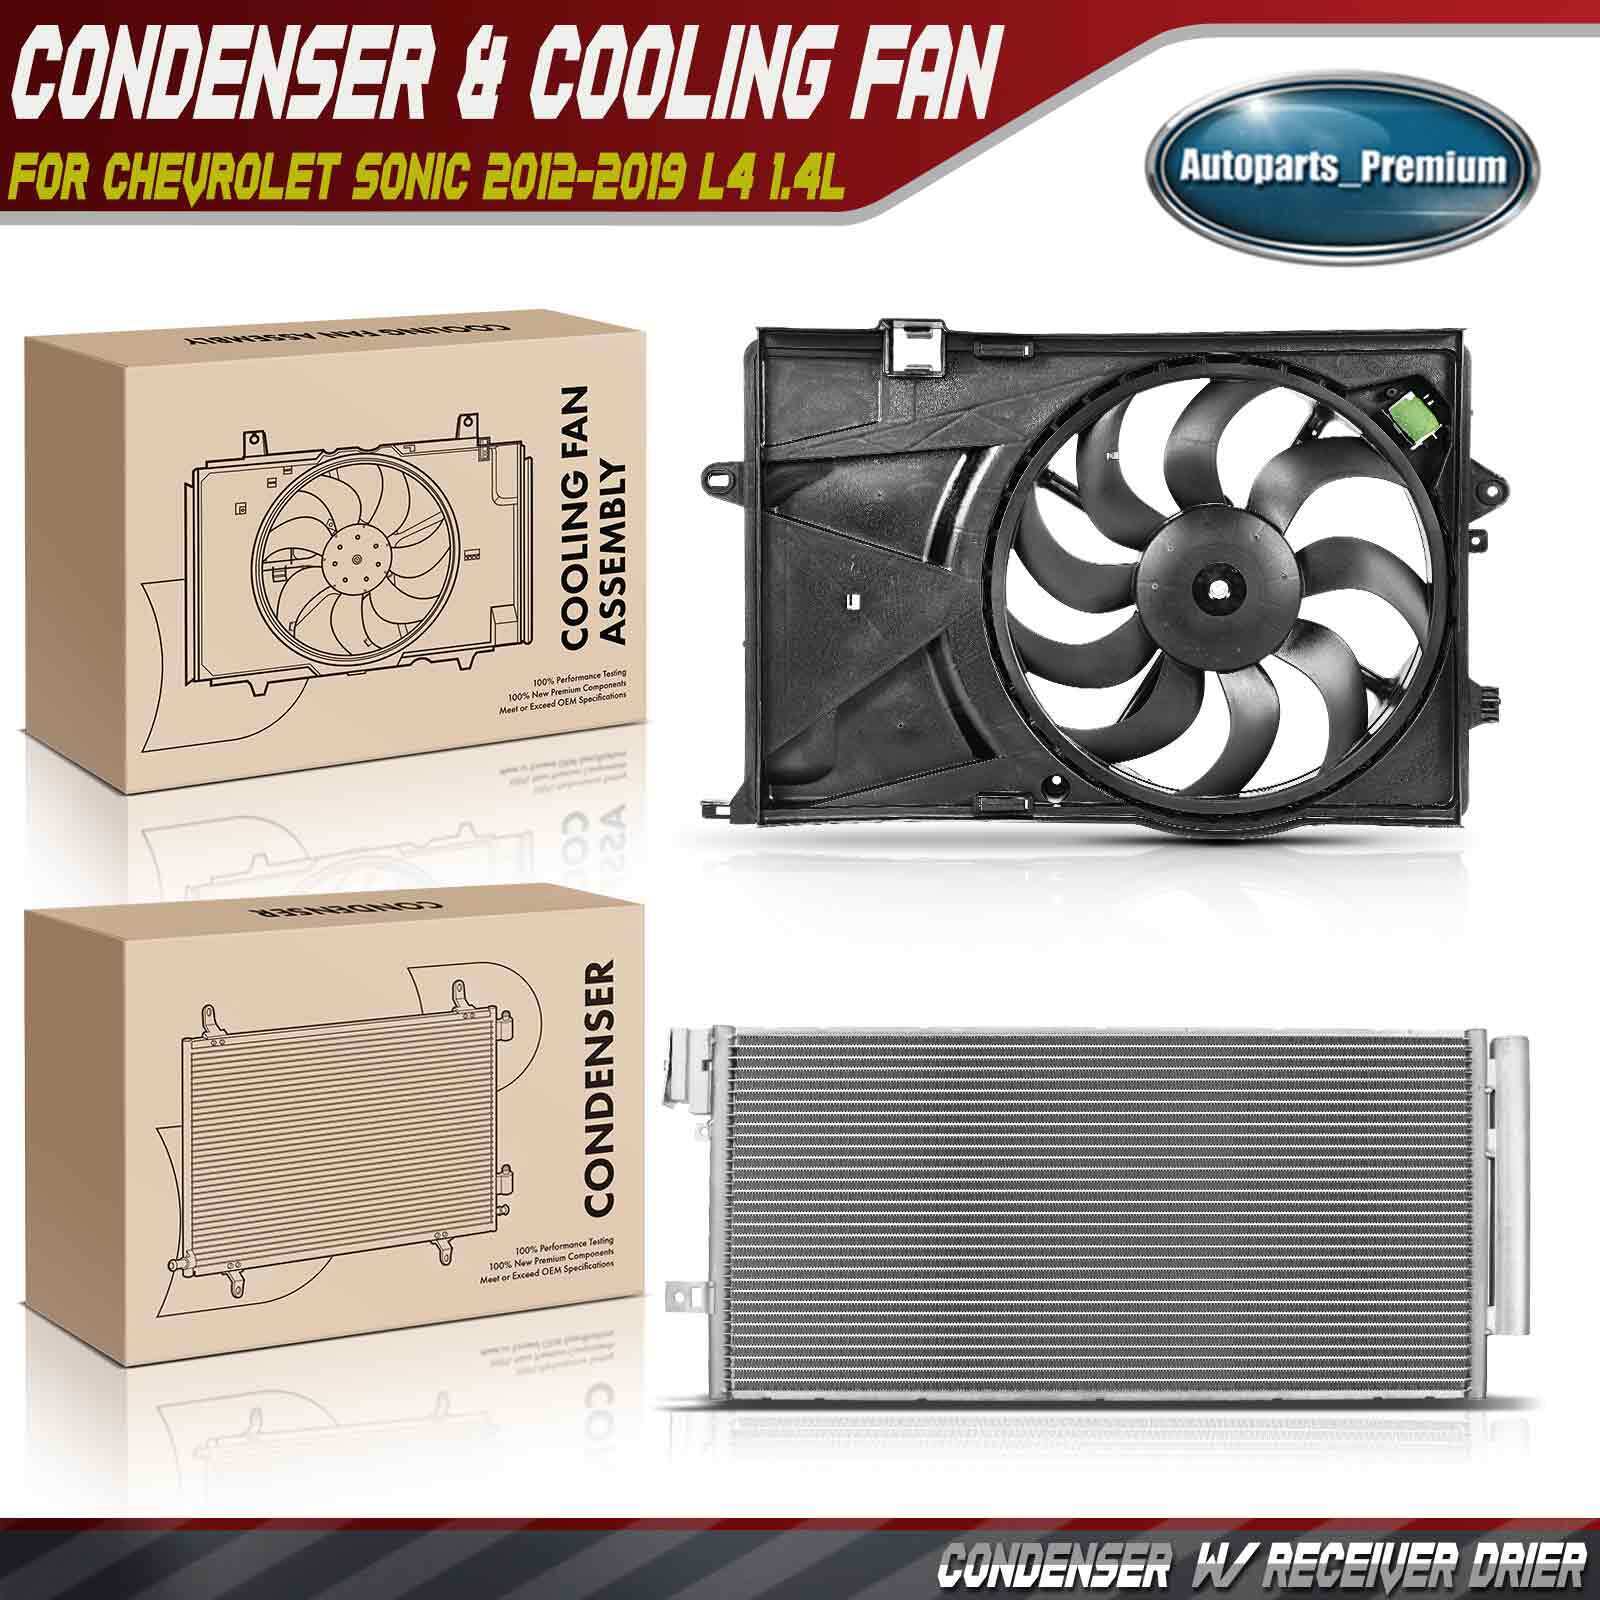 A/C Condenser & Cooling Fan Assembly Kit for Chevrolet Sonic 2012-2019 L4 1.4L